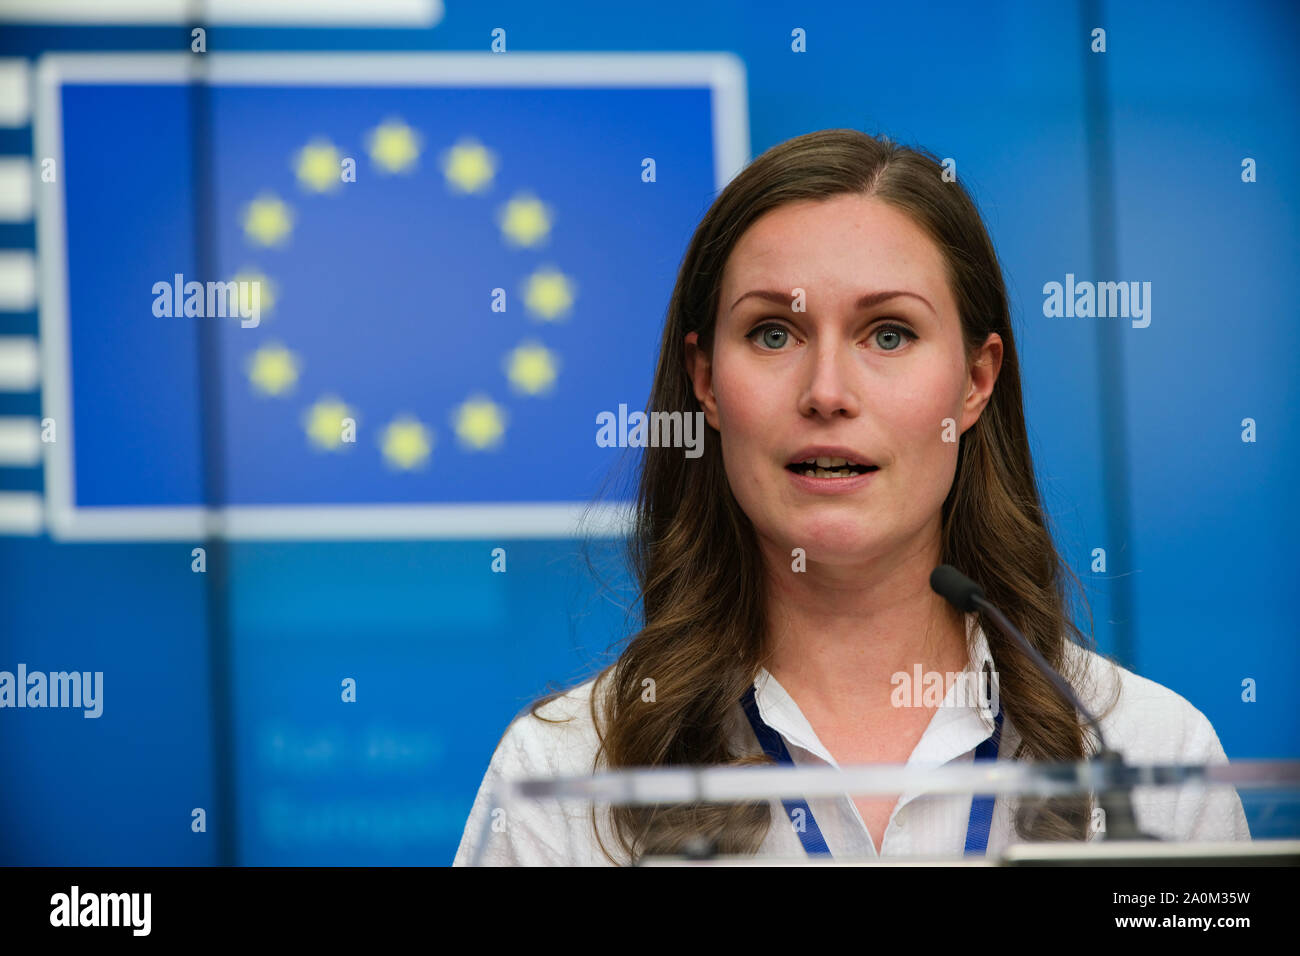 Brussels, Belgium. 20th Sep, 2019. Finnish Minister for Transport and Communications Sanna Marin attends a press conference of the EU Transport, Telecommunications and Energy Council, in Brussels, Belgium, Sept. 20, 2019. Credit: Zhang Cheng/Xinhua/Alamy Live News Stock Photo